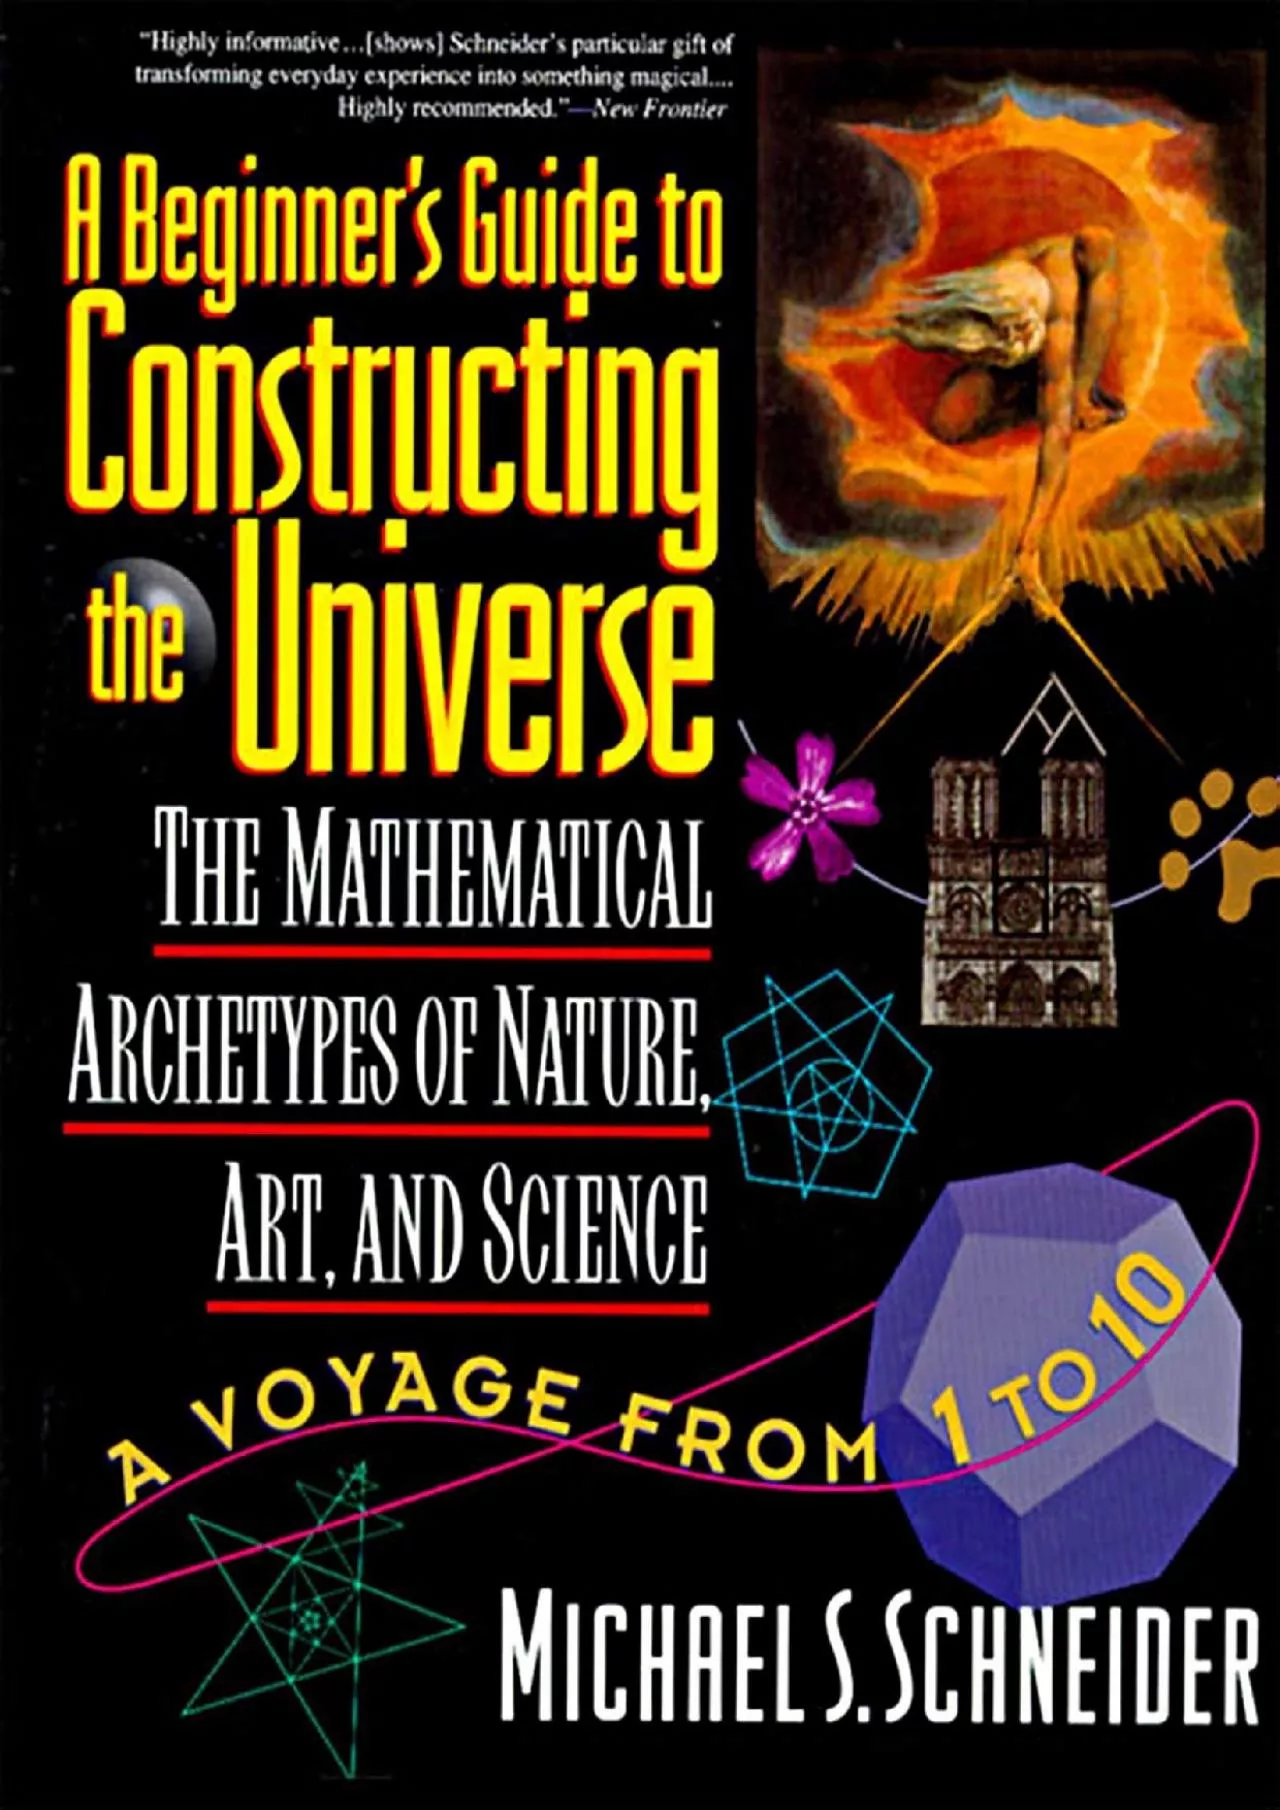 (EBOOK)-A Beginner\'s Guide to Constructing the Universe: Mathematical Archetypes of Nature,